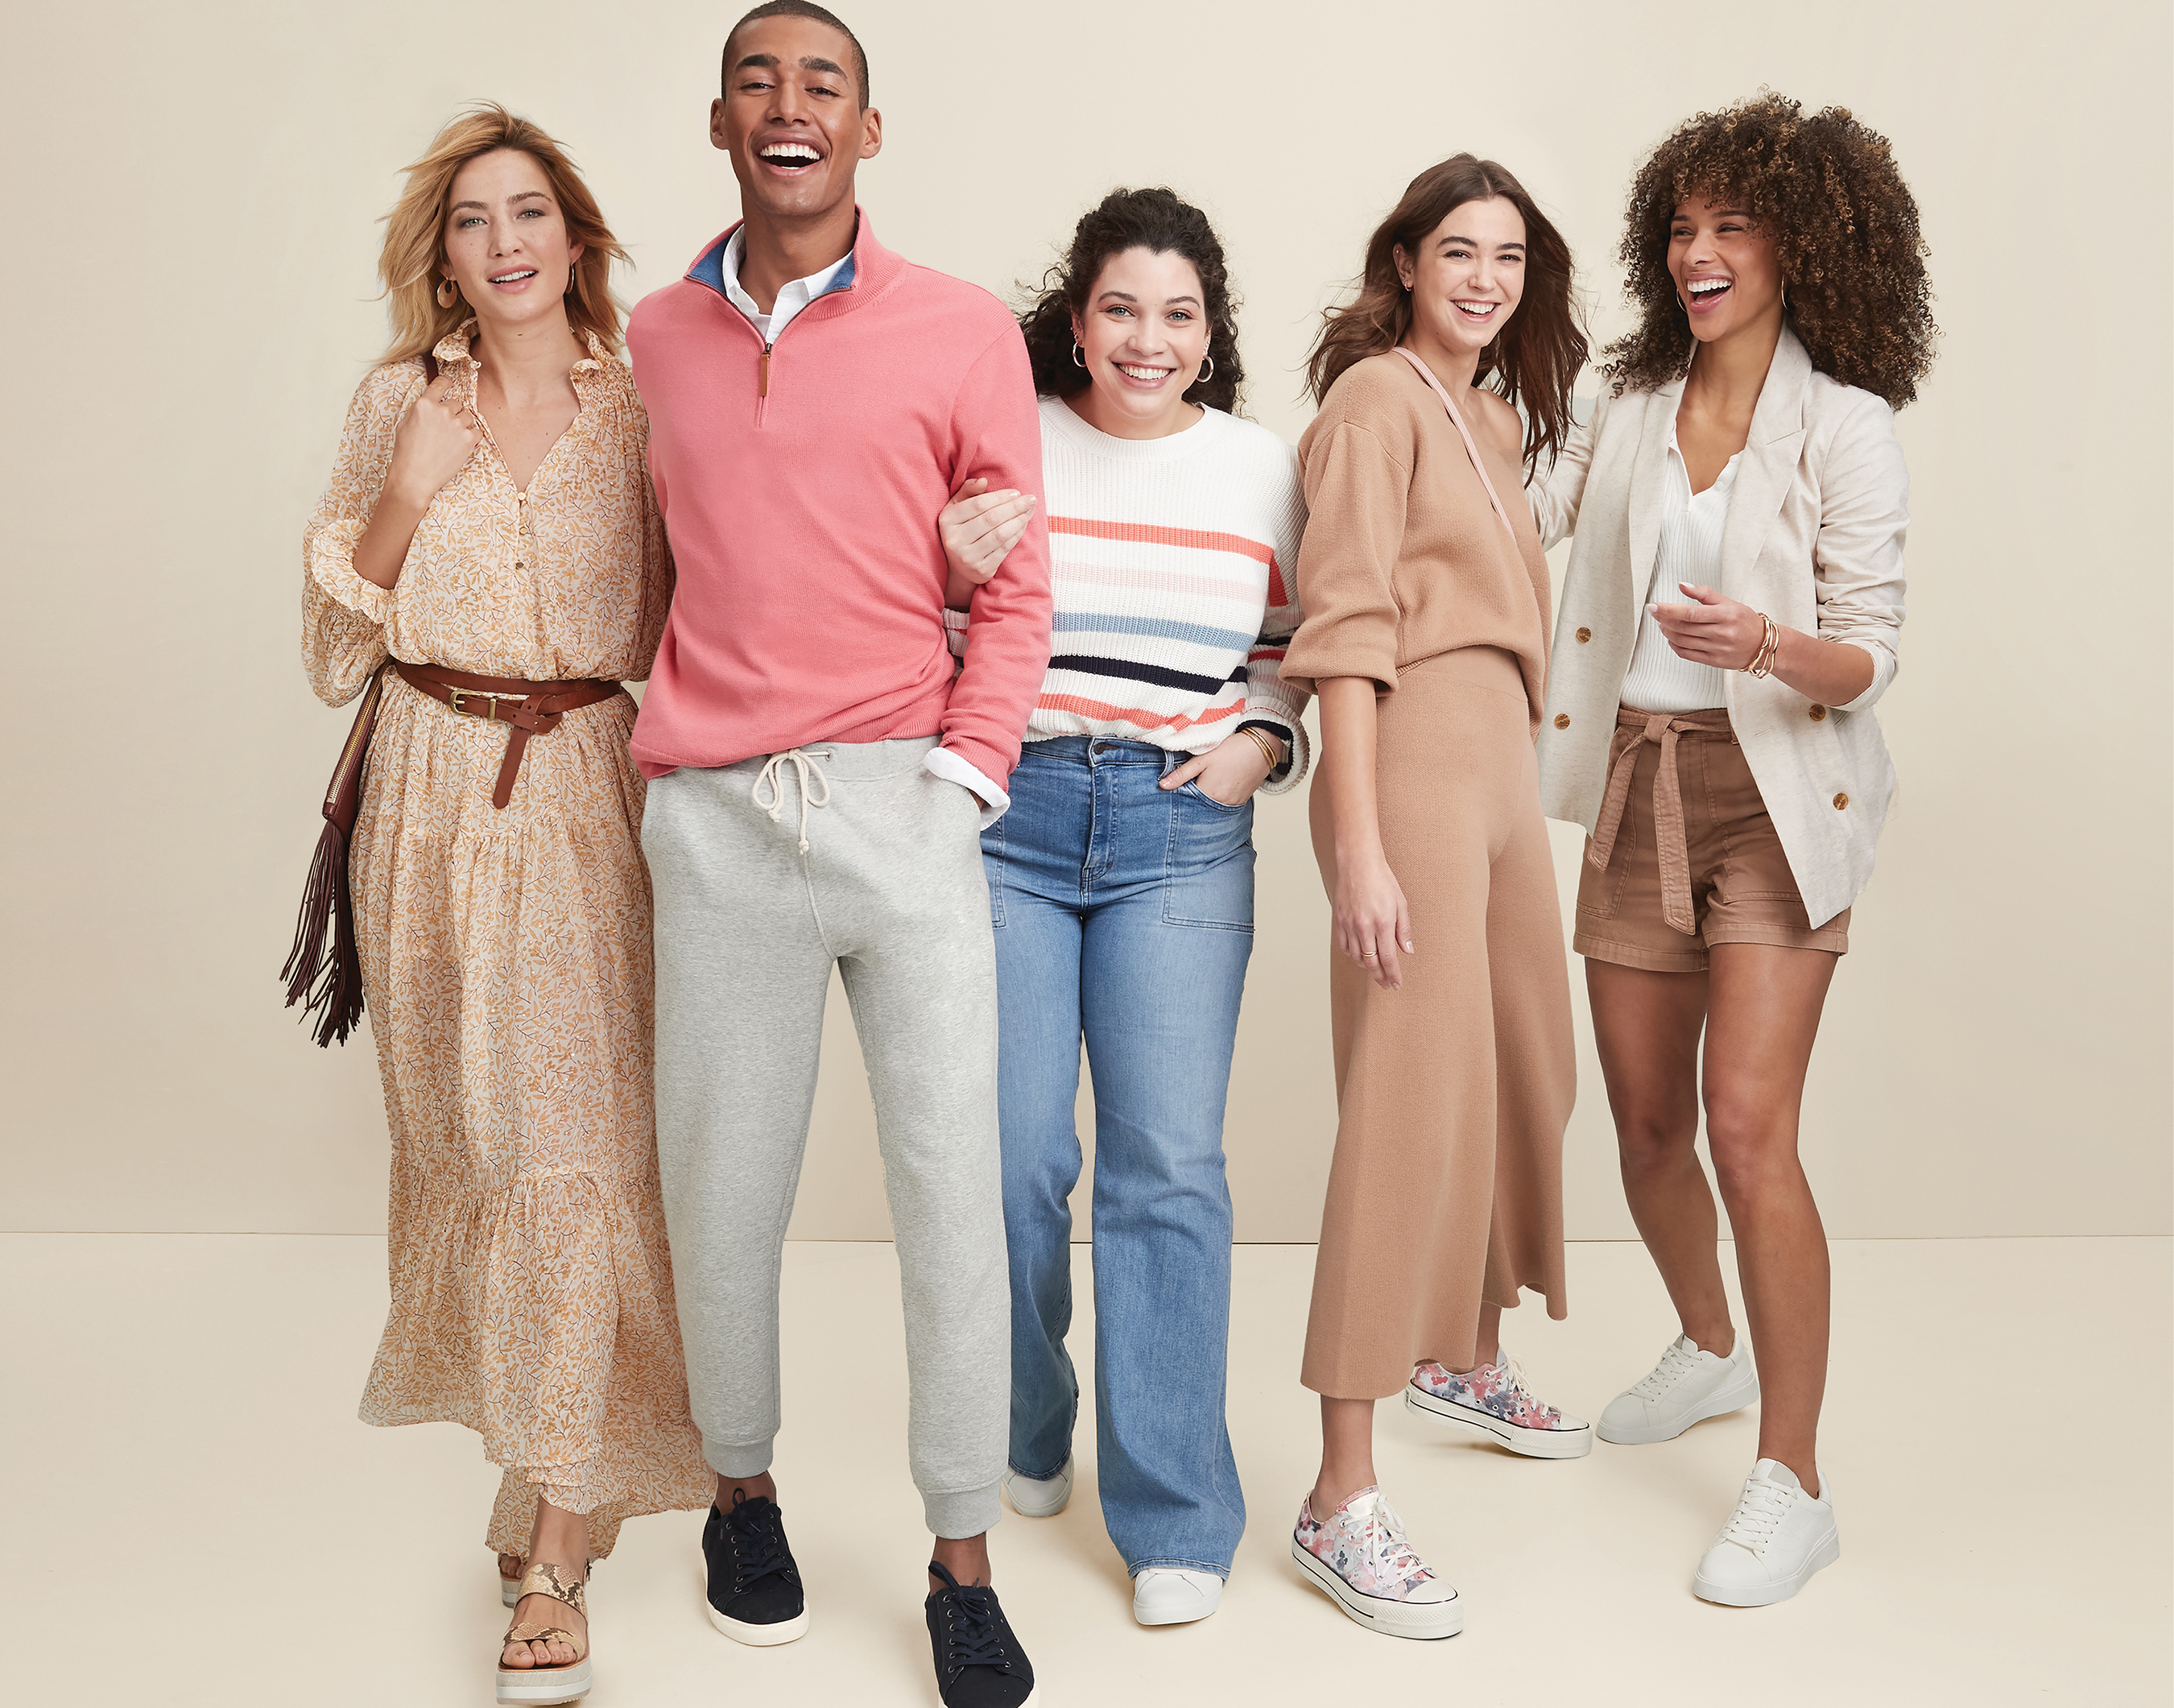 Tanger Outlets Celebrates Spring with Launch of TangerStyle 2022, now through April 24